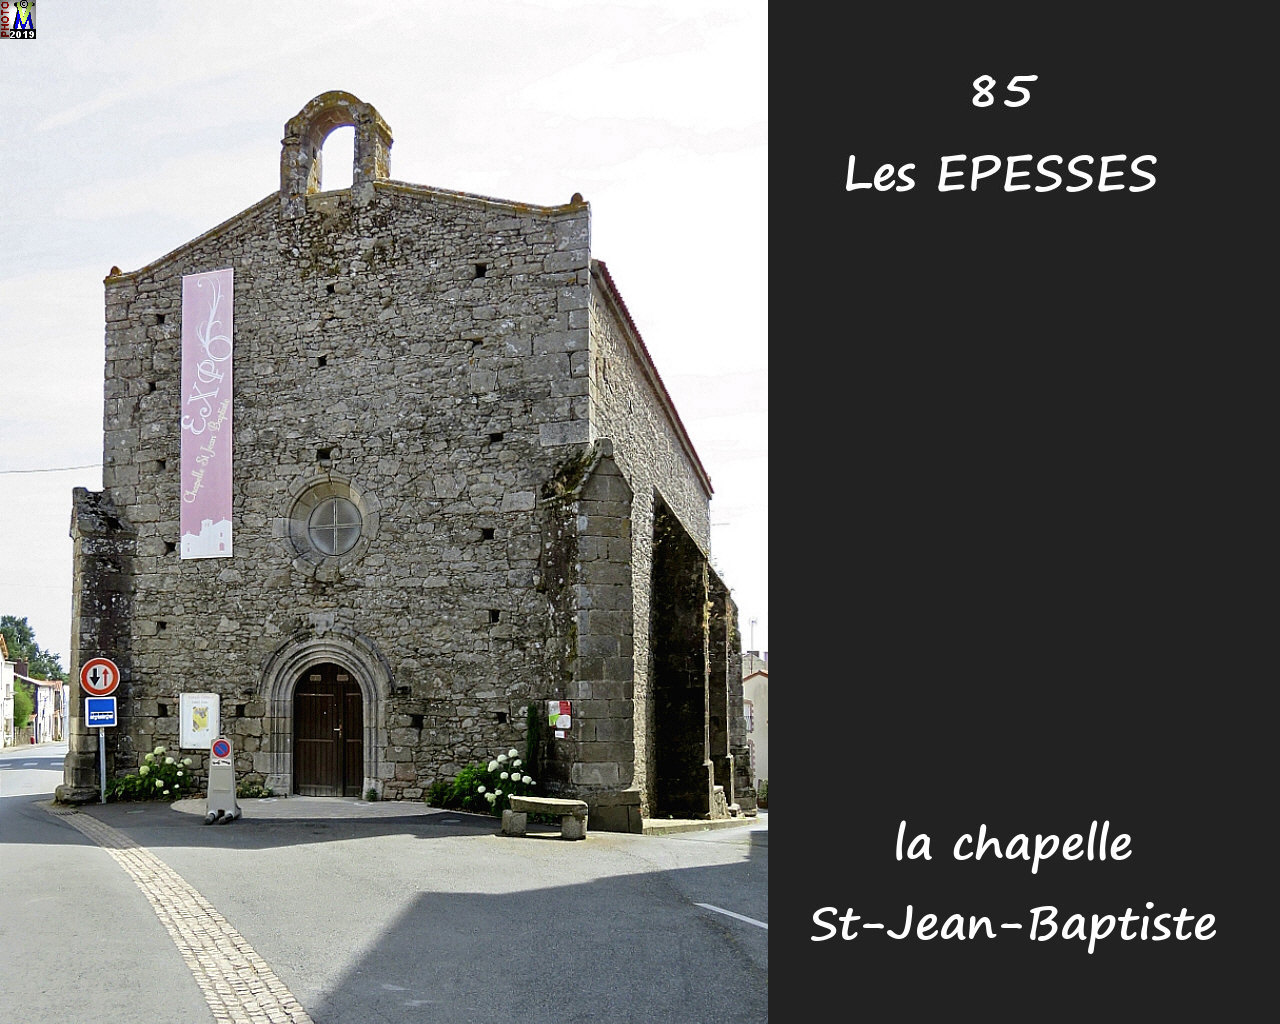 85EPESSES_chapelle_1000.jpg